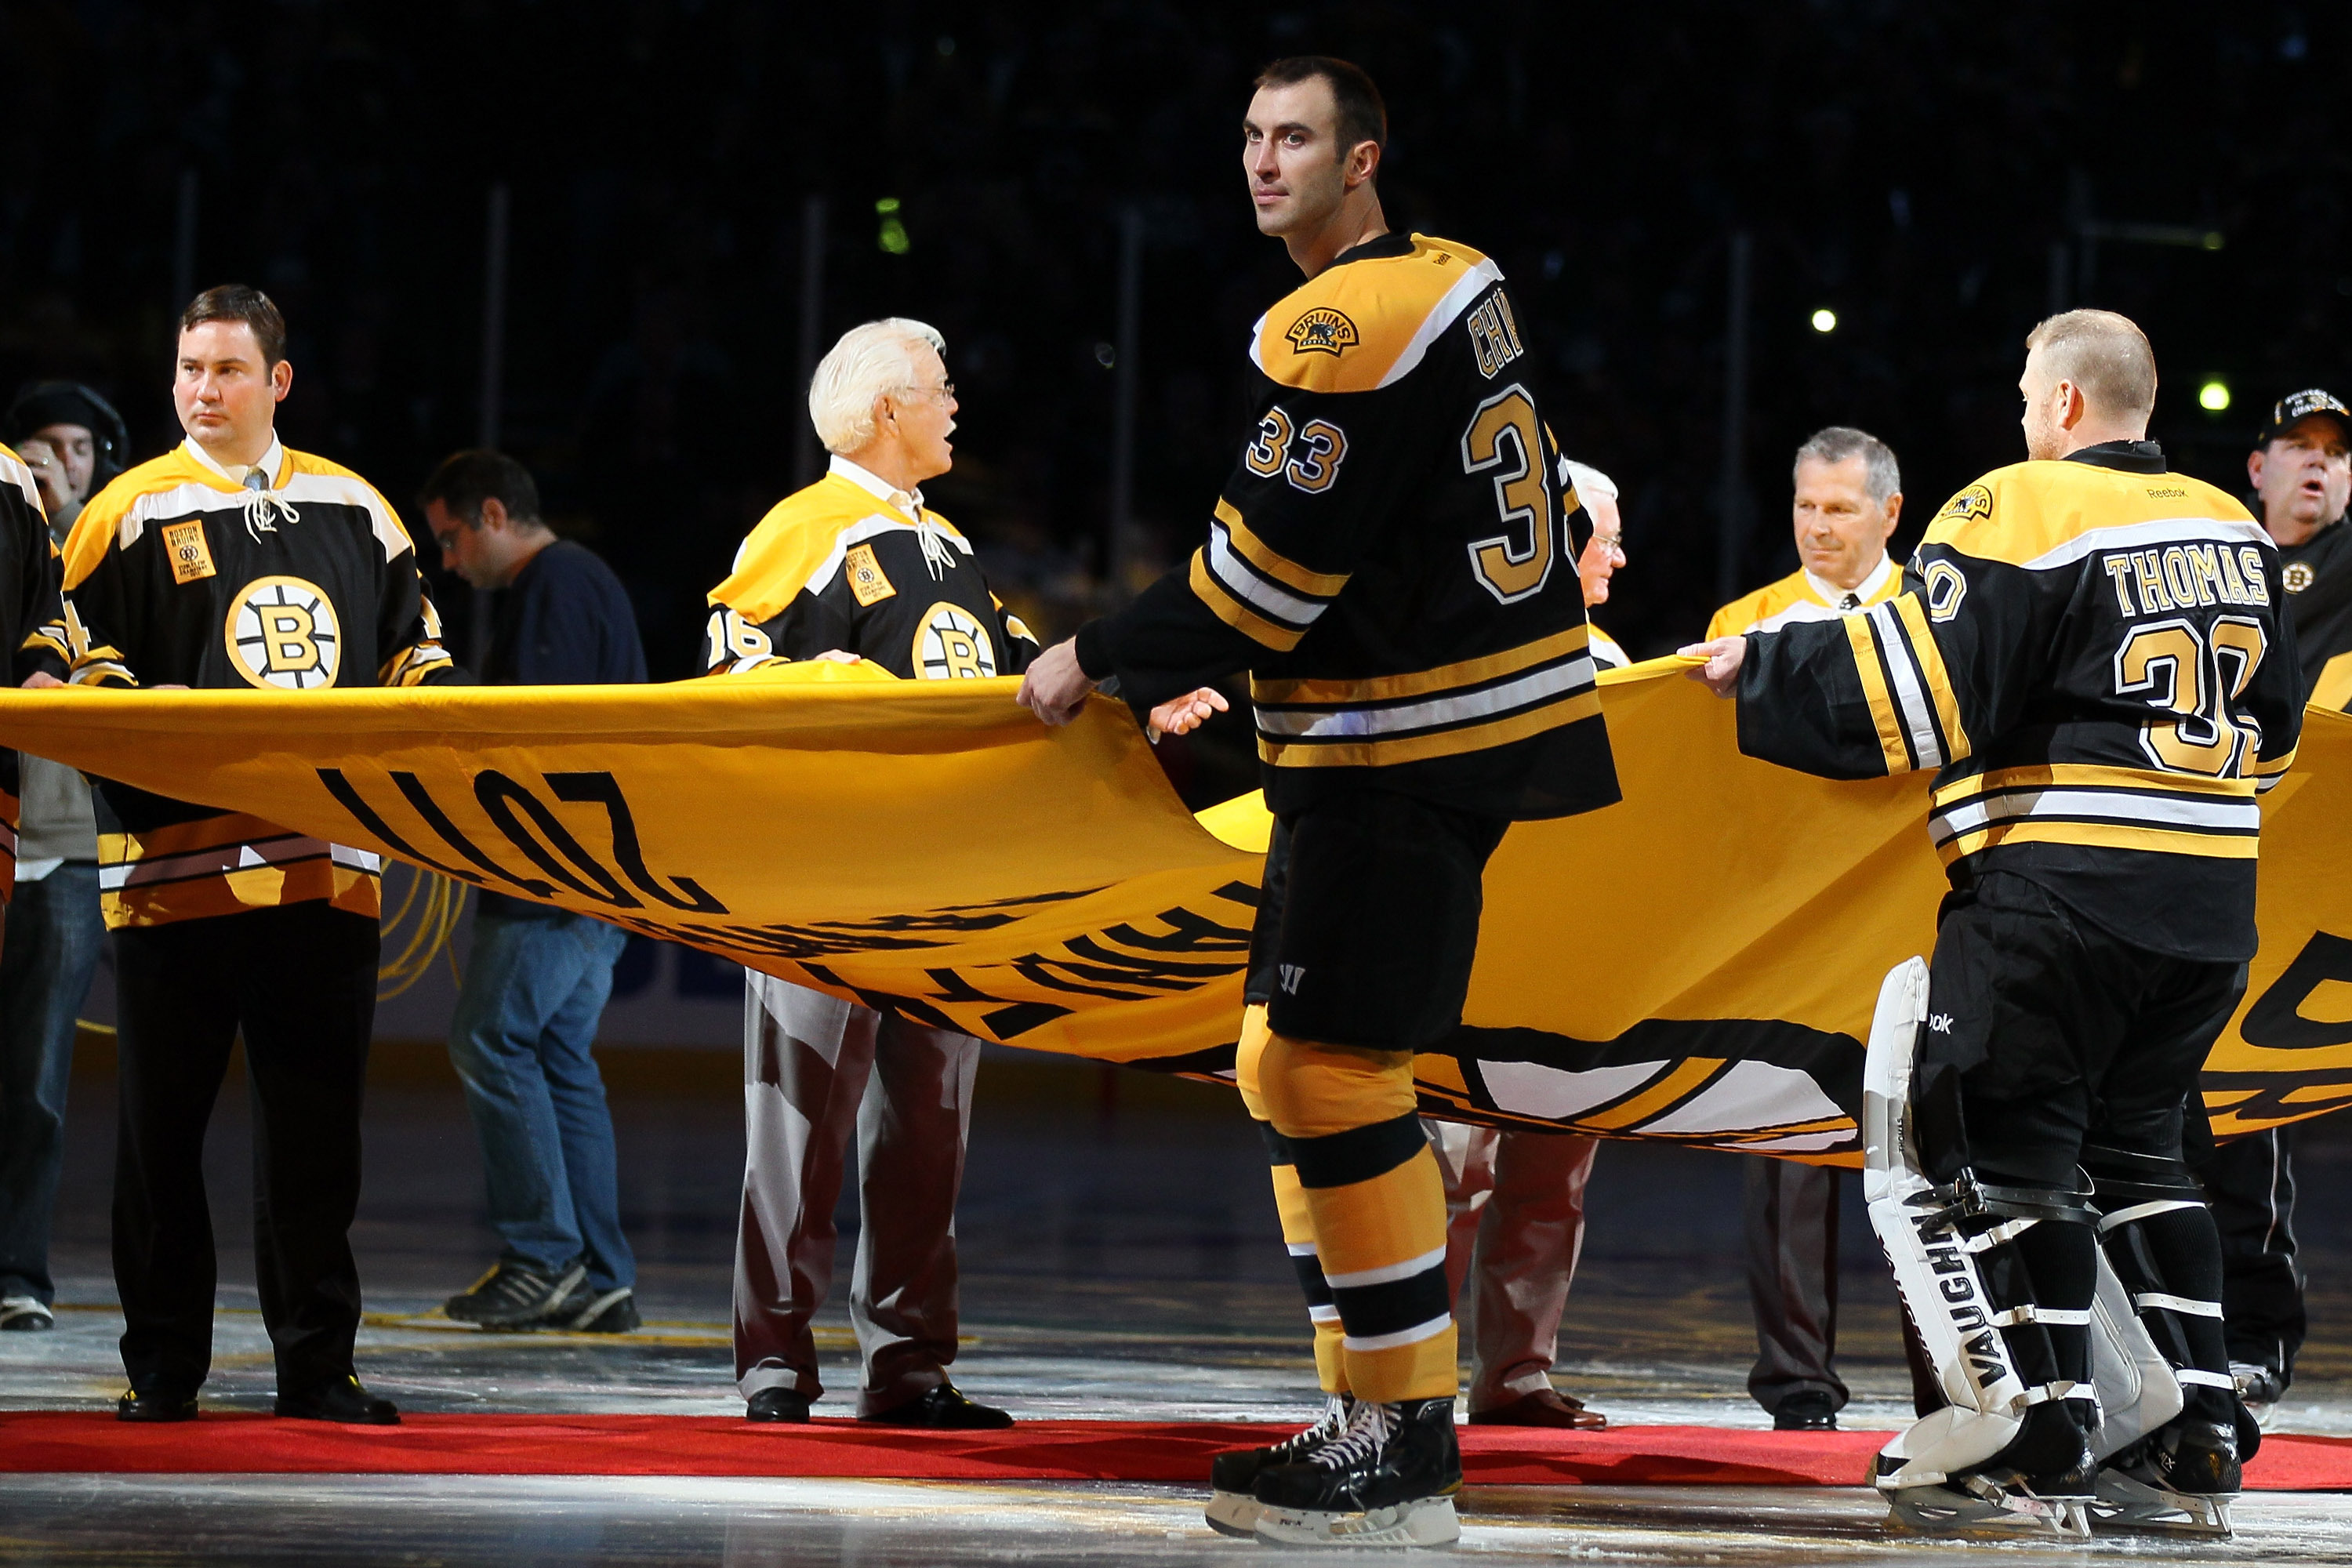 Why that number? Bruins explain origins of their uniform digits - The